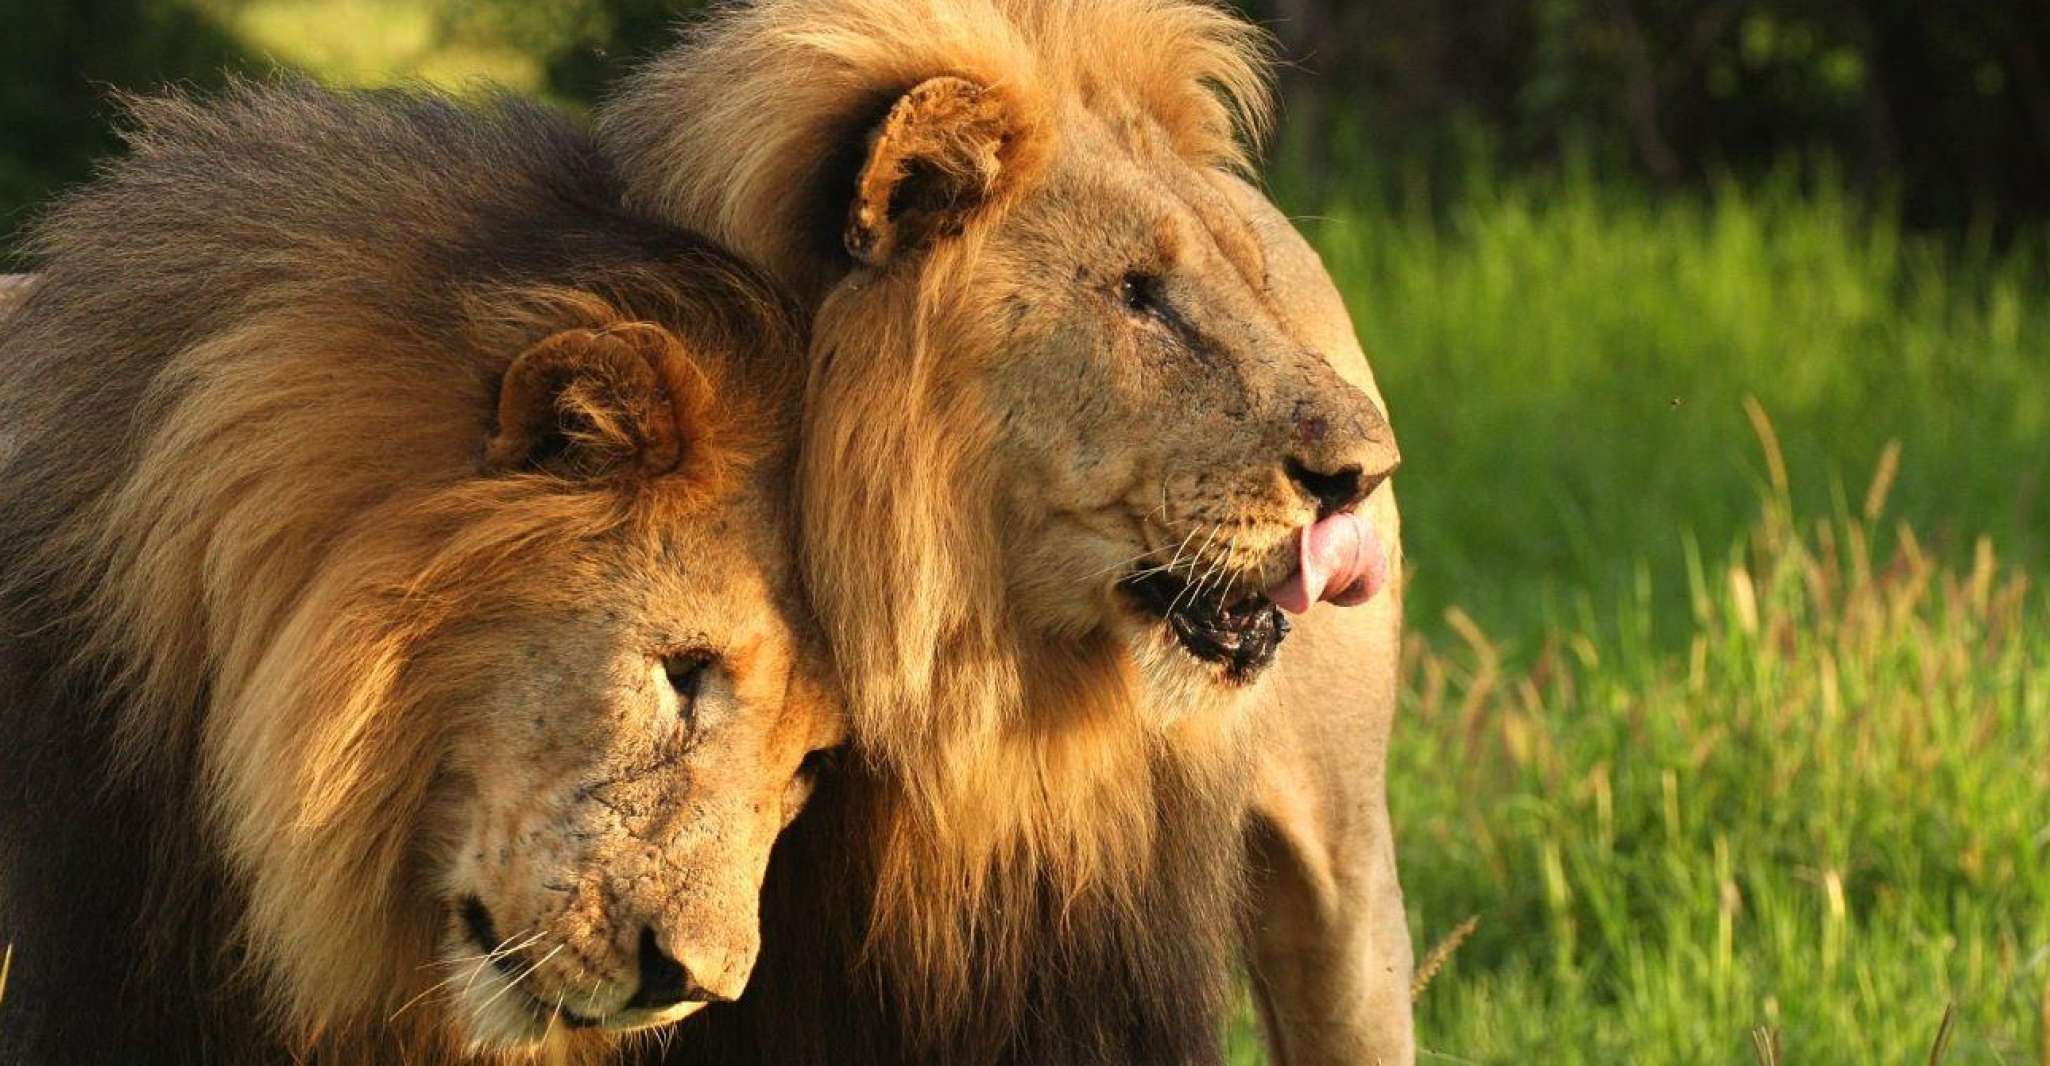 Tala Game Reserve & Natal Lion Park 1/2 Day Tour from Durban - Housity